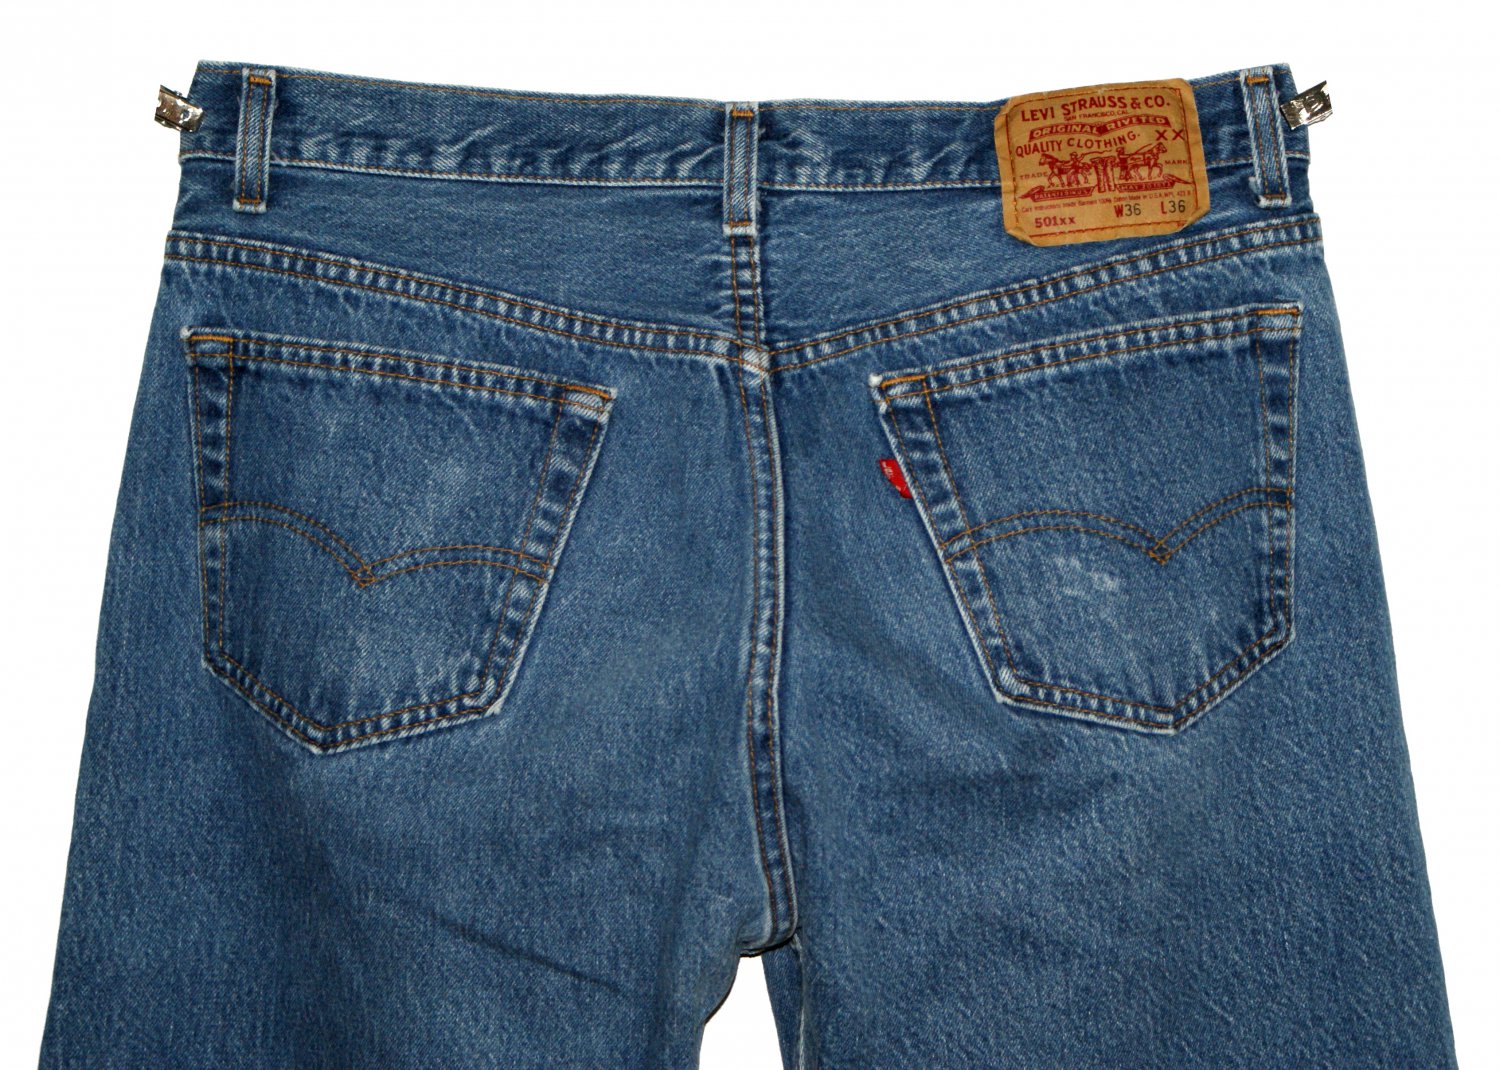 VINTAGE 1992 LEVI'S 501 xx CLASSIC BLUE DENIM JEANS - Made in USA - W36